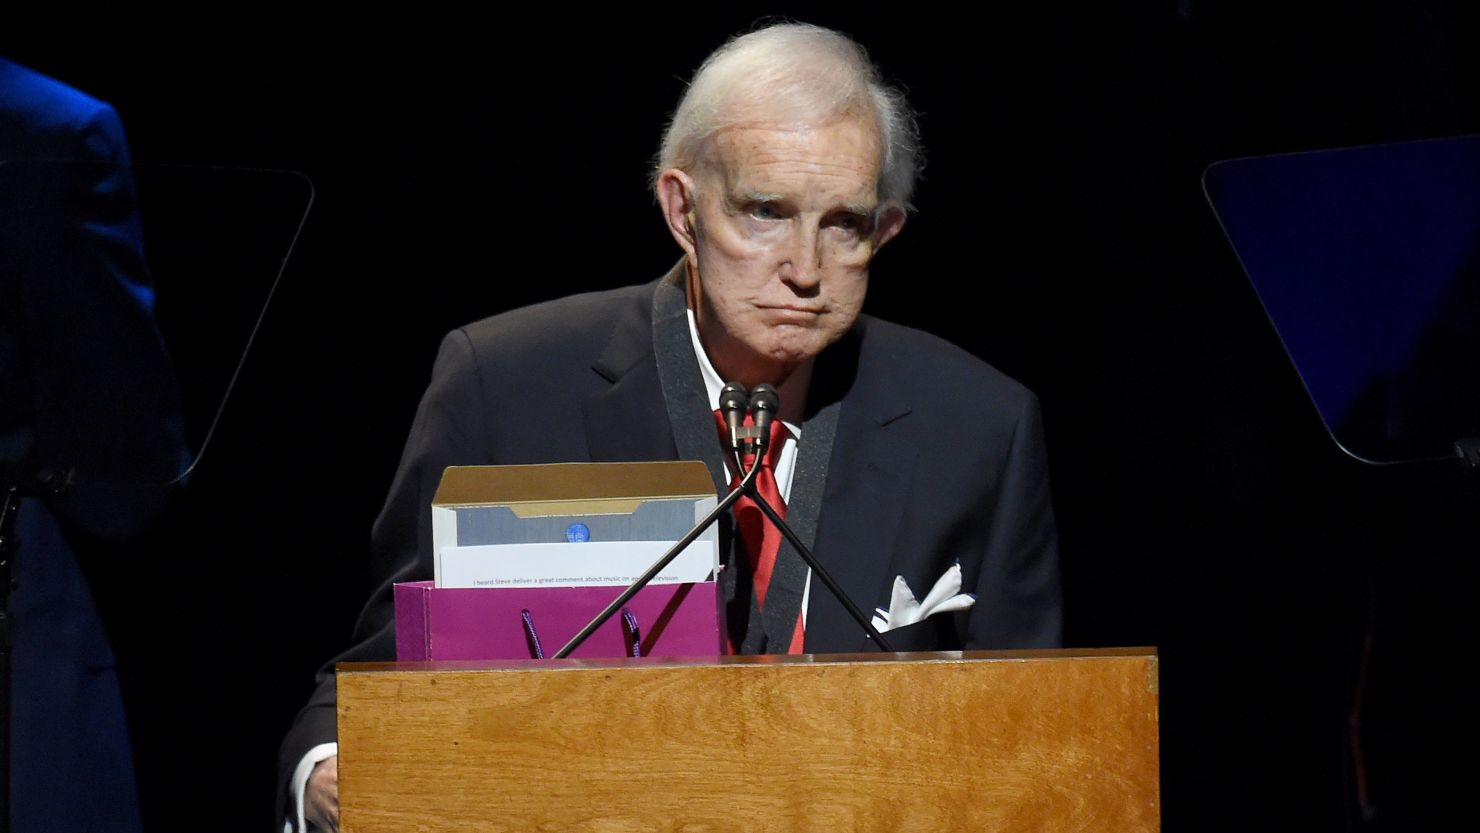 Ralph Emery at the Country Music Hall of Fame Medallion Ceremony in Nashville on October 20, 2019.